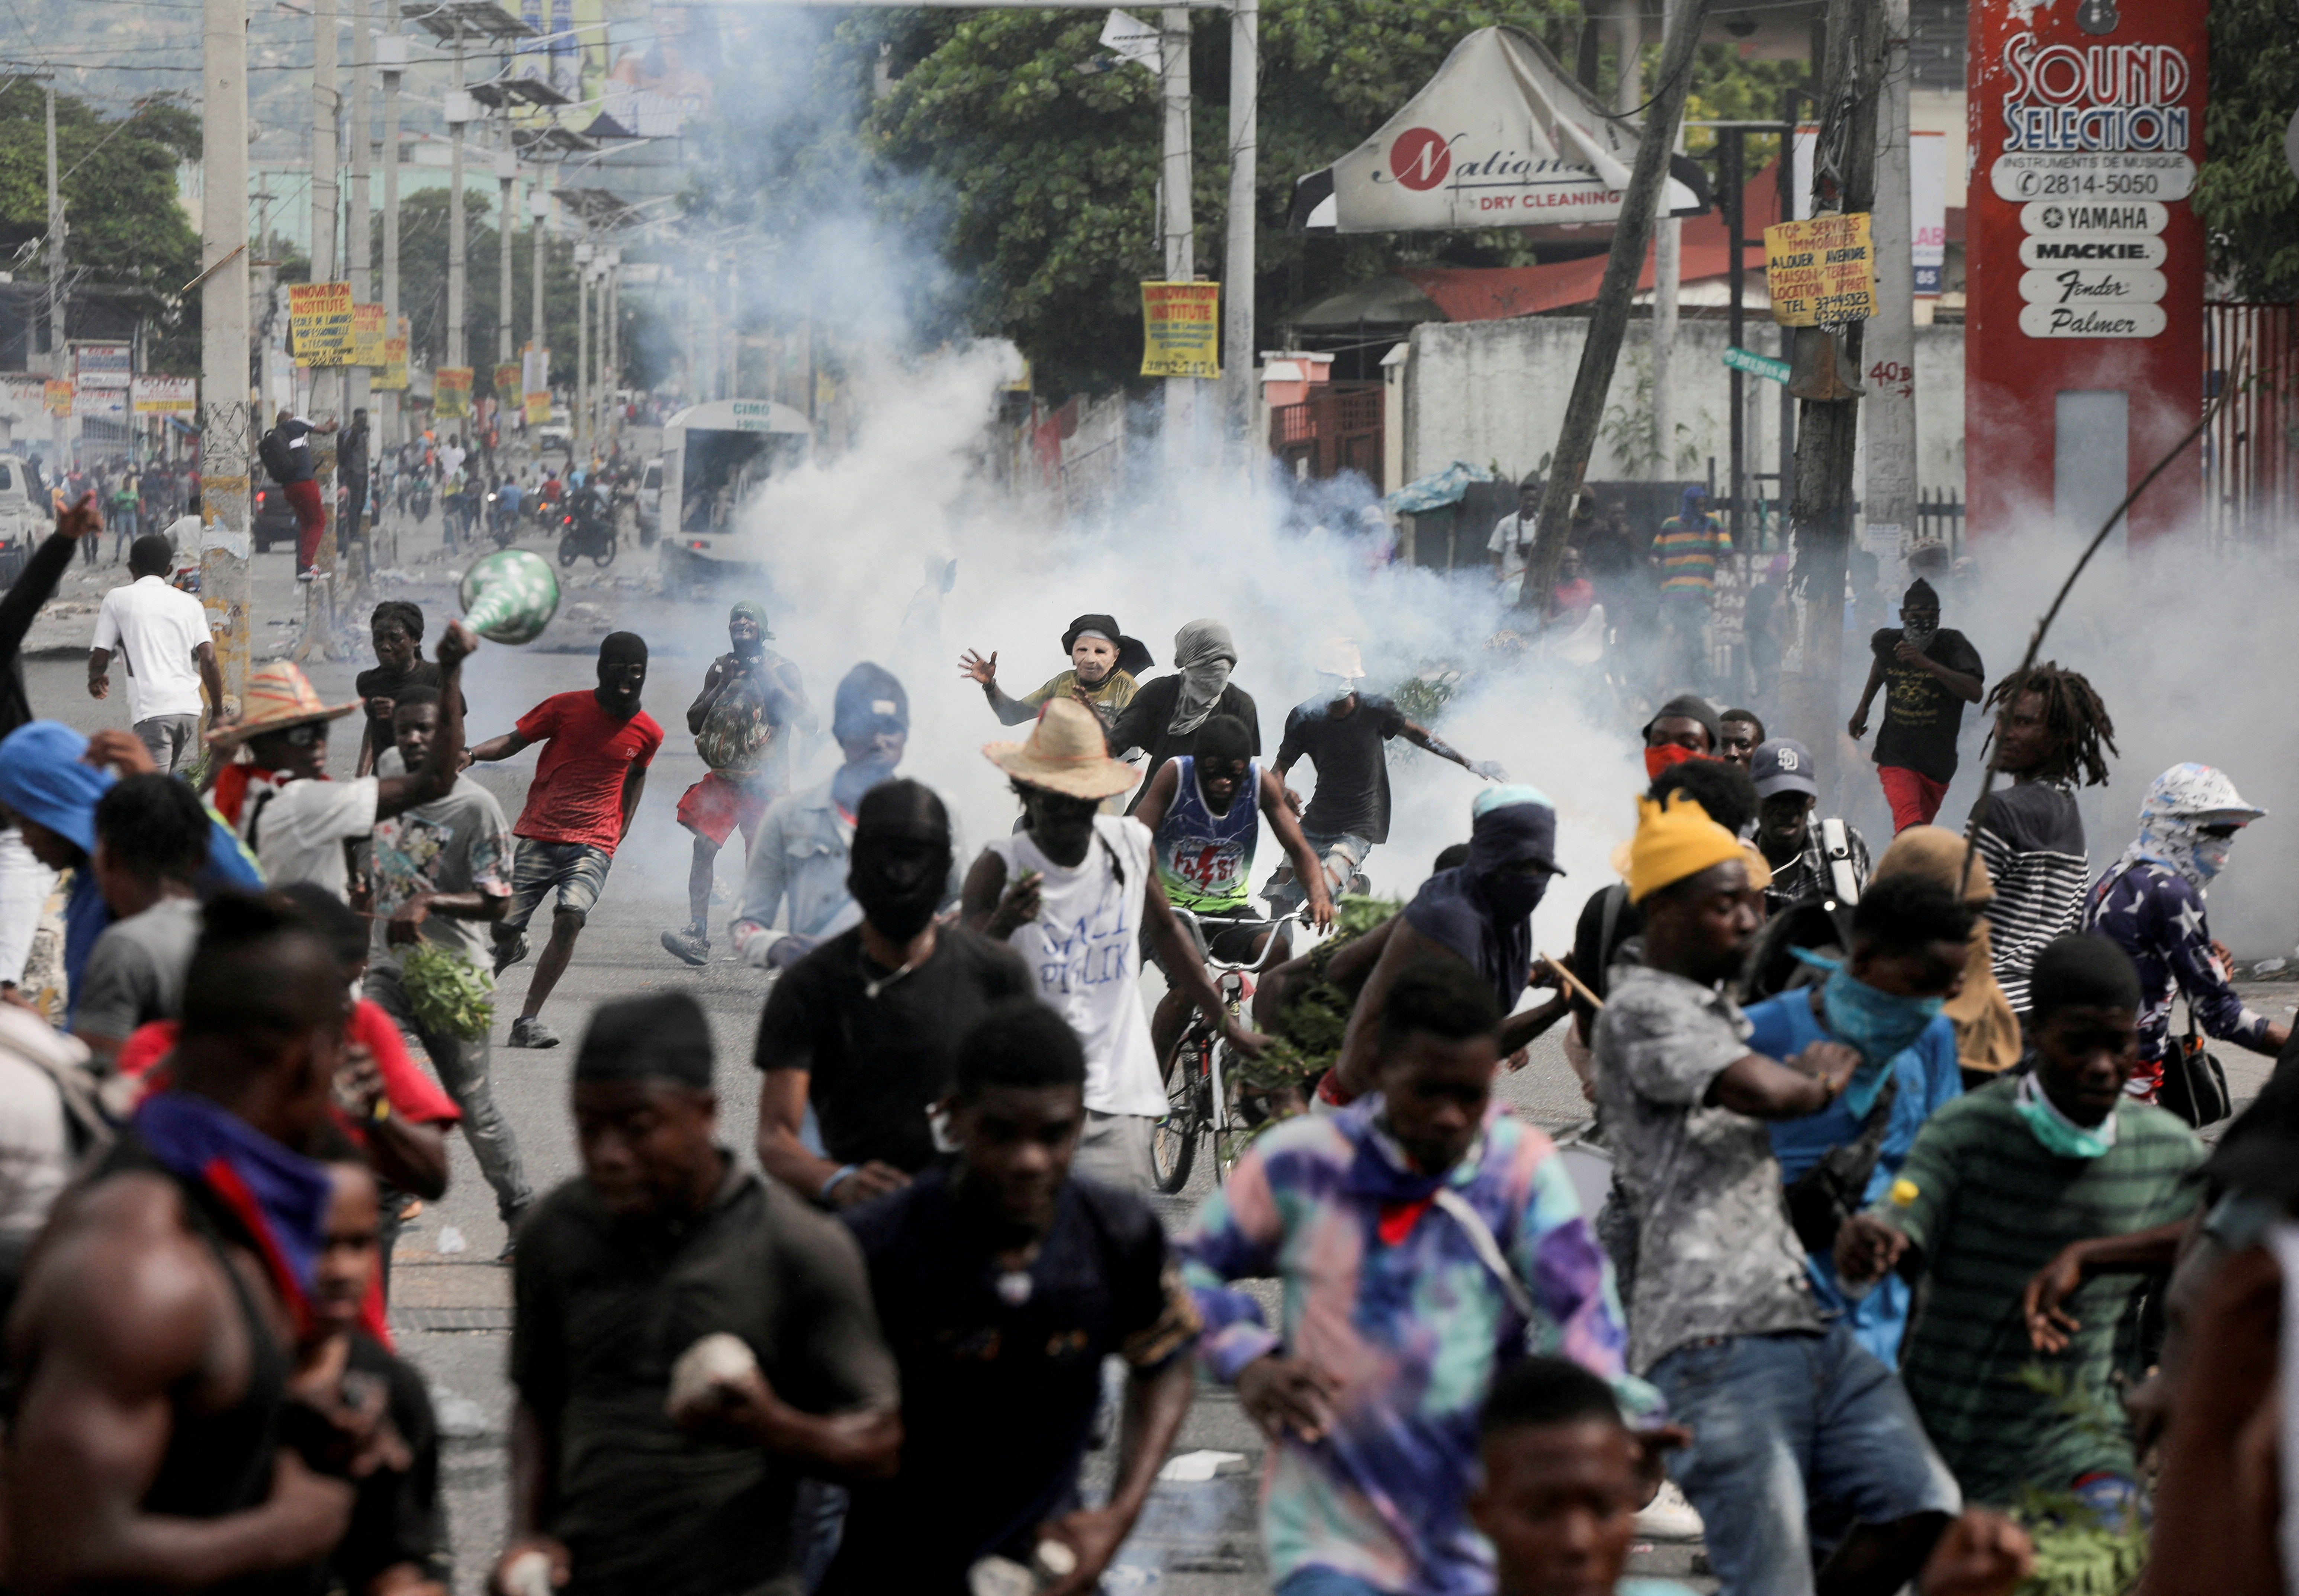 Demonstrators take part in a protest demanding the resignation of Haiti's Prime Minister Ariel Henry